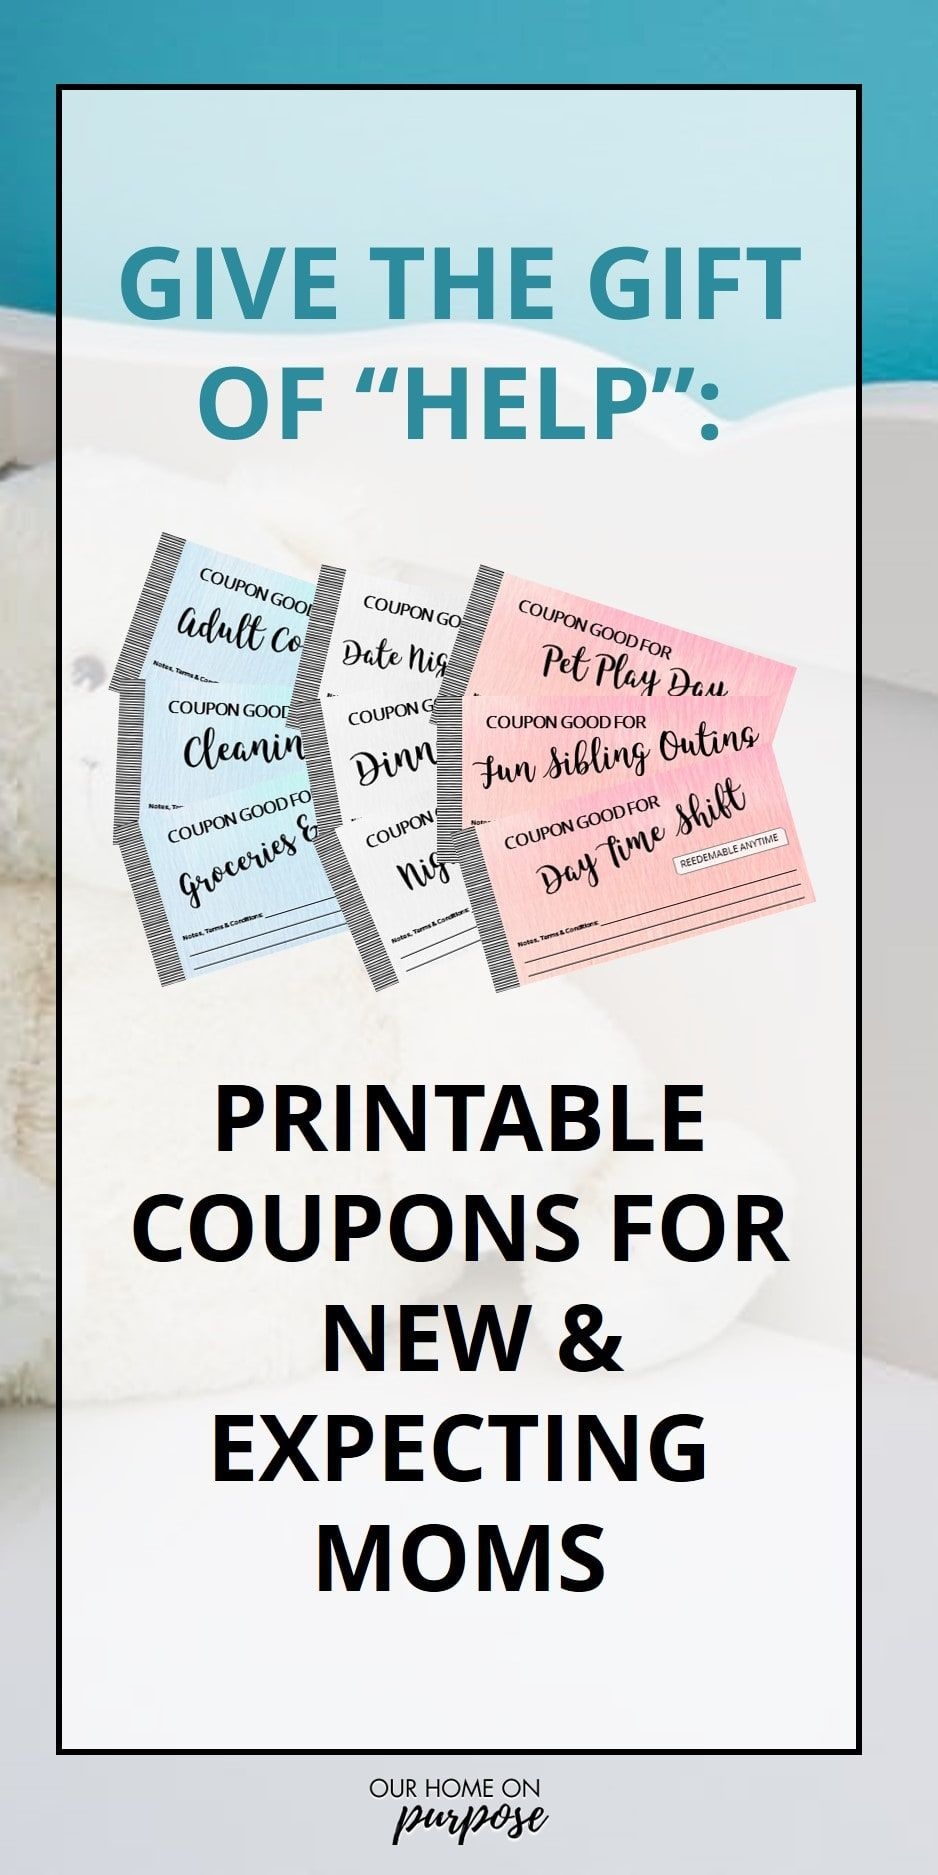 Give The Gift Of Help: Printable Coupons For New &amp;amp; Expecting Moms - Free Printable Coupons For Baby Diapers